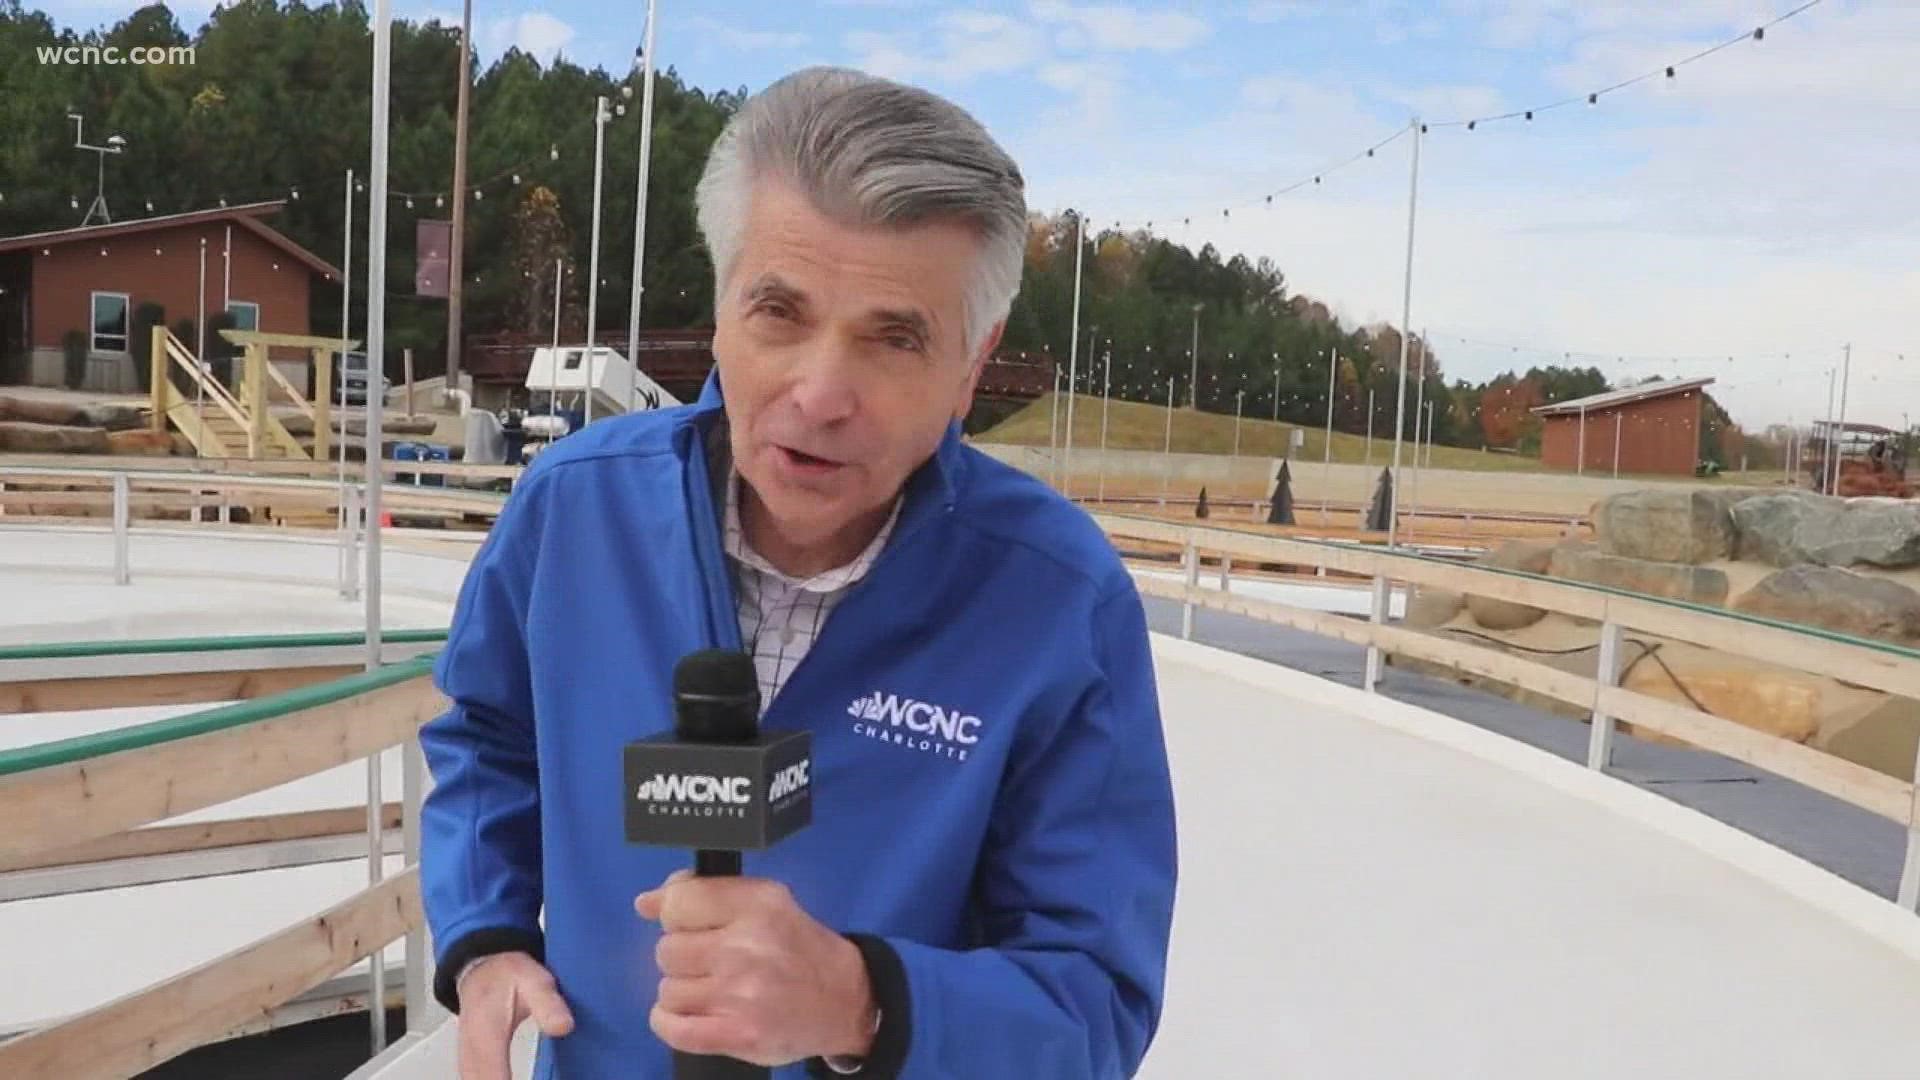 WCNC Charlotte's Larry Sprinkle got some time on the ice before anyone else arrived.